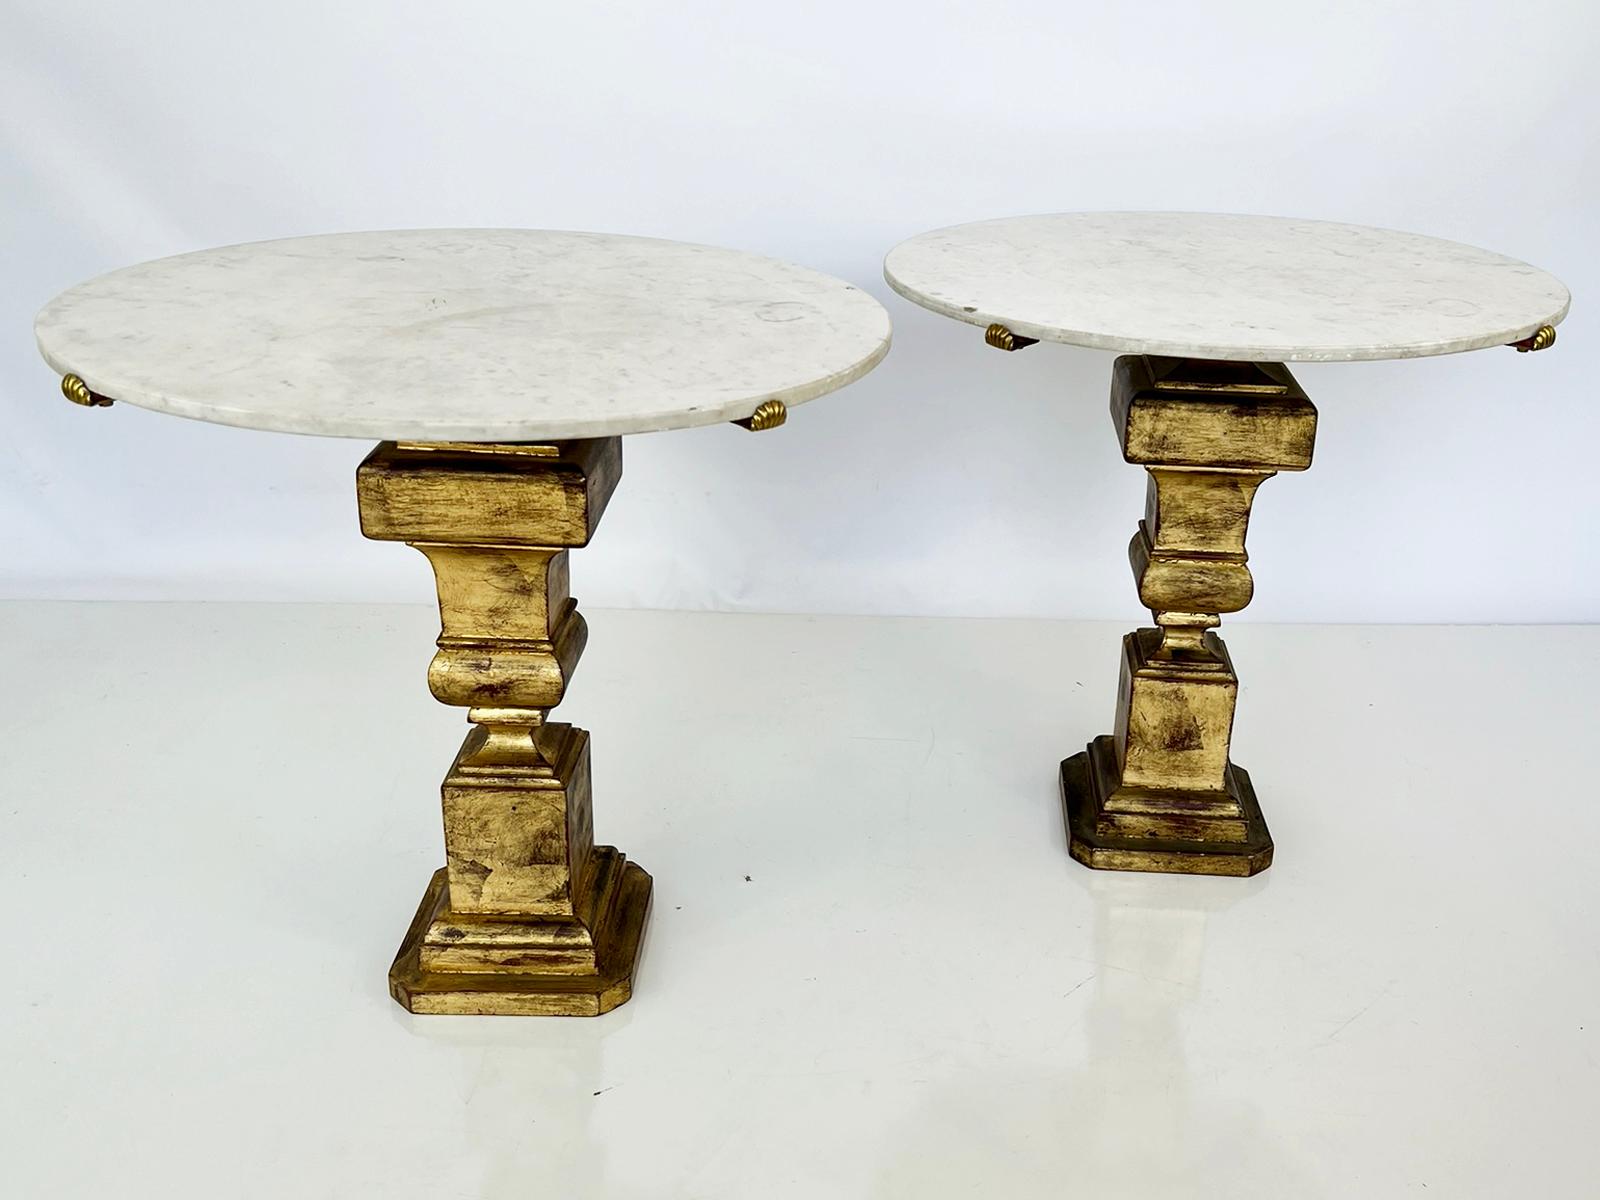 Pair of side tables, by the Italian design house, Palladio. Each table having a round top of Carrara marble, held by scallop shell clips, of brass. The pedestal bases of gilt metal with a square-section, balustrade shape, on base with canted